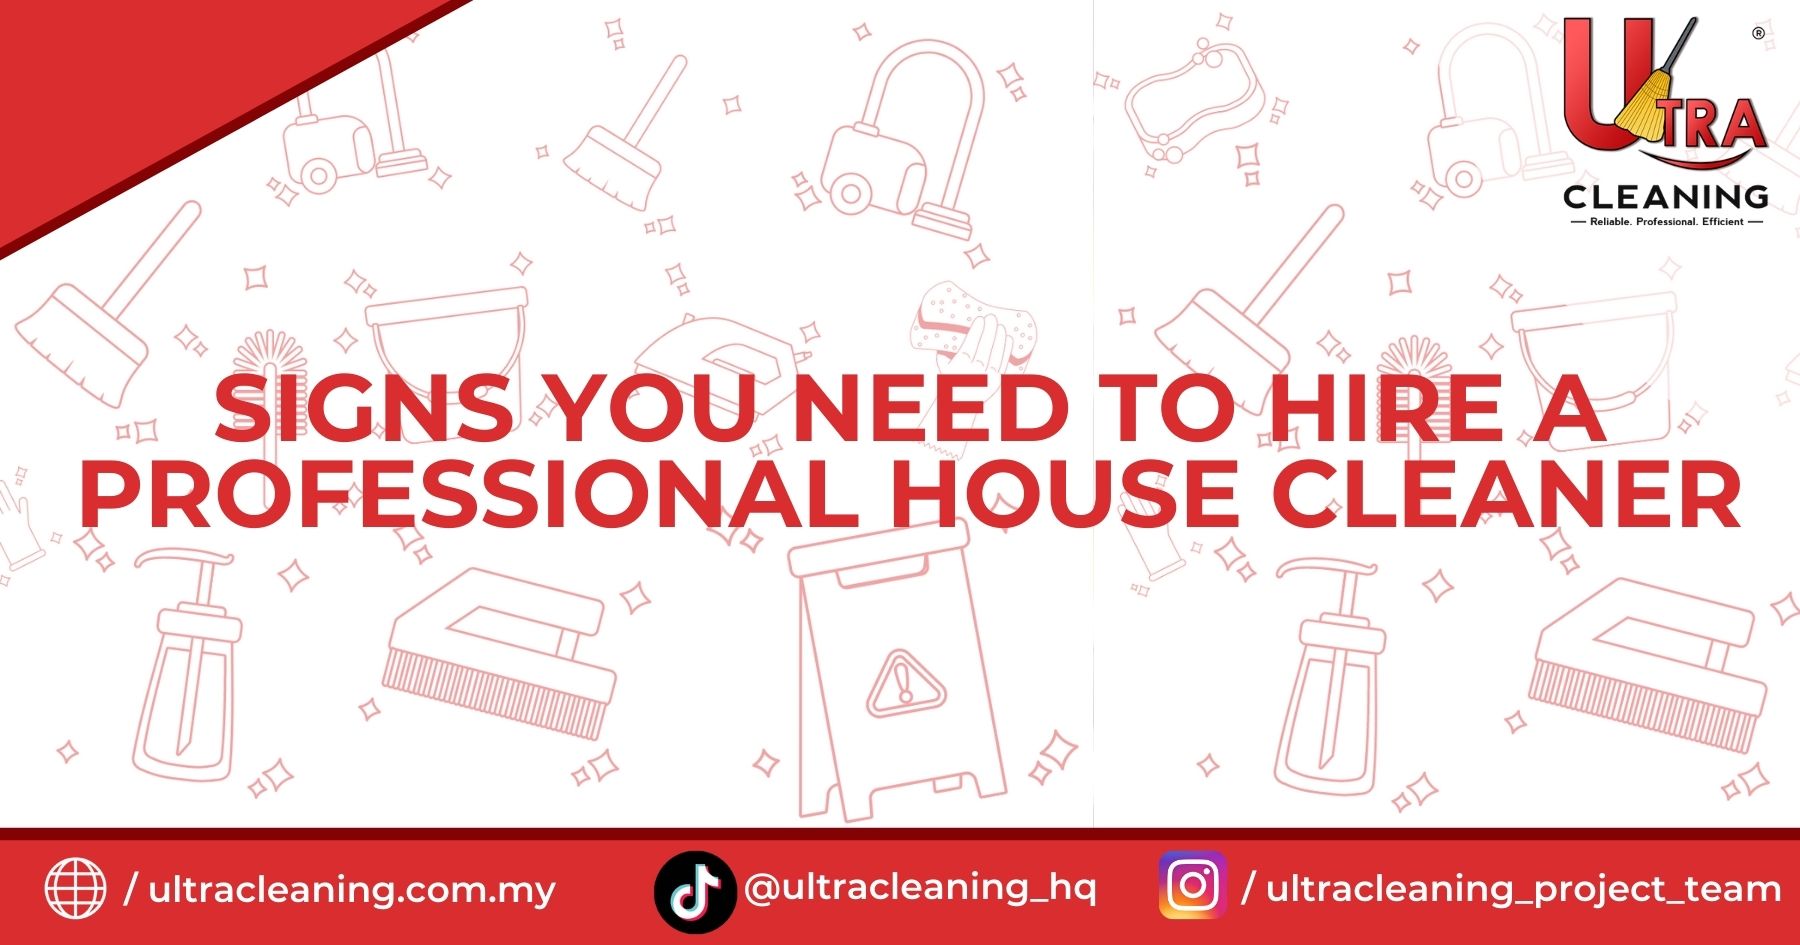 Signs You Need to Hire a Professional House Cleaner